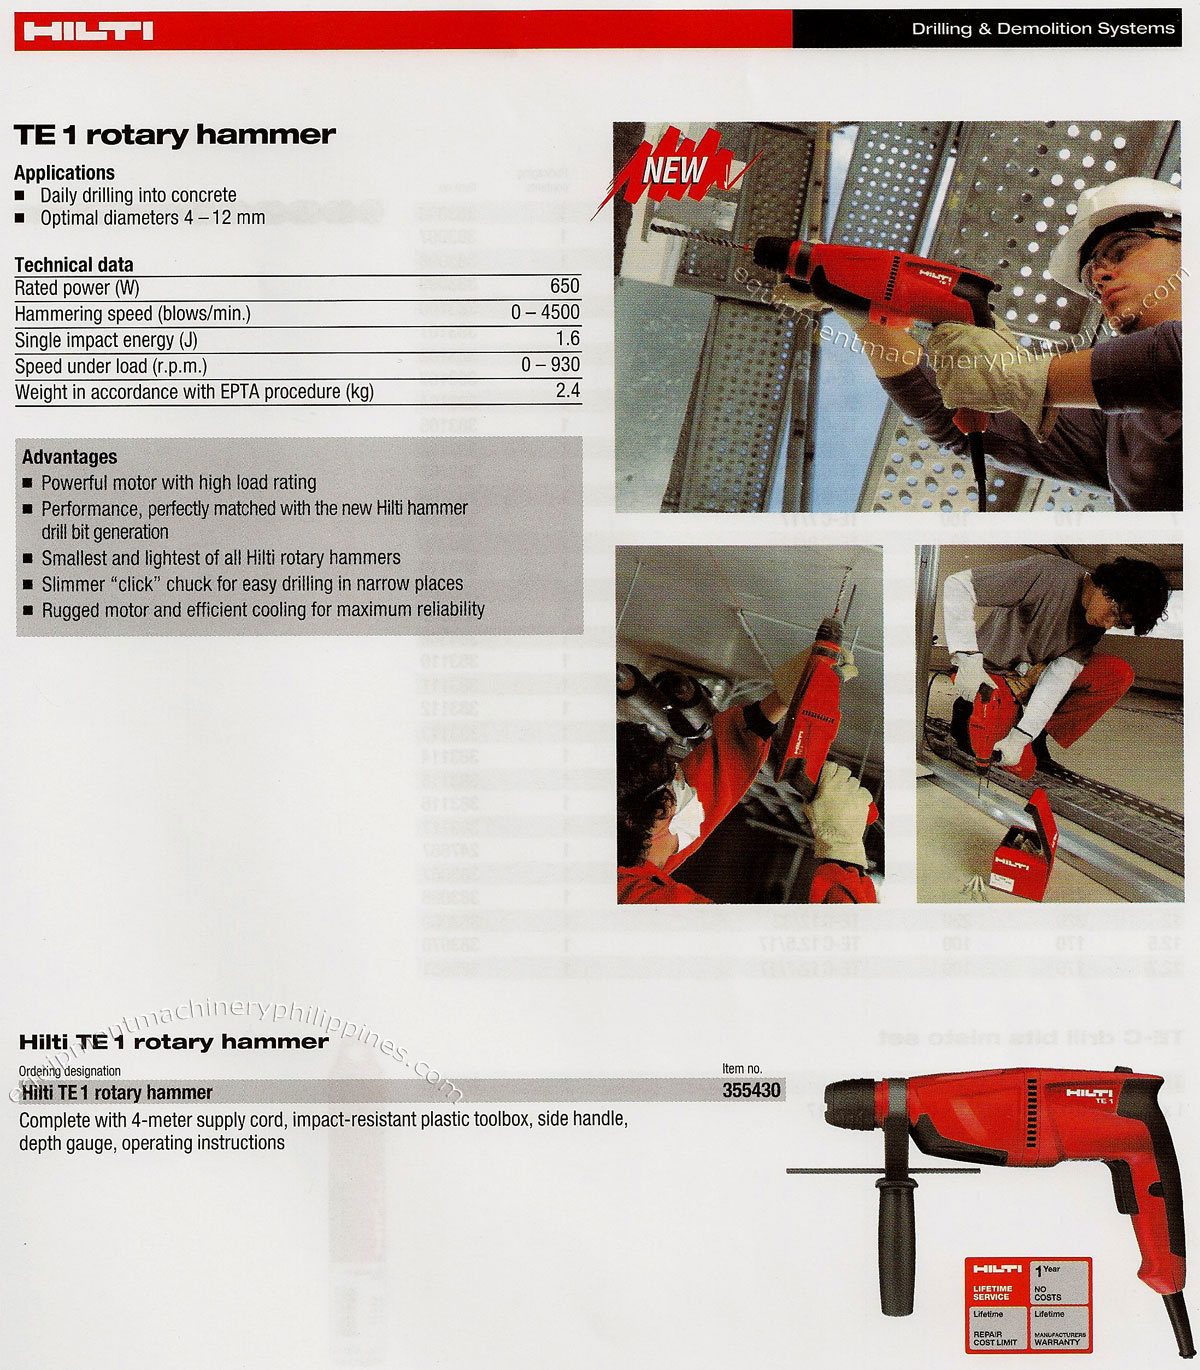 TE 1 Rotary Hammer for Drilling and Demolition